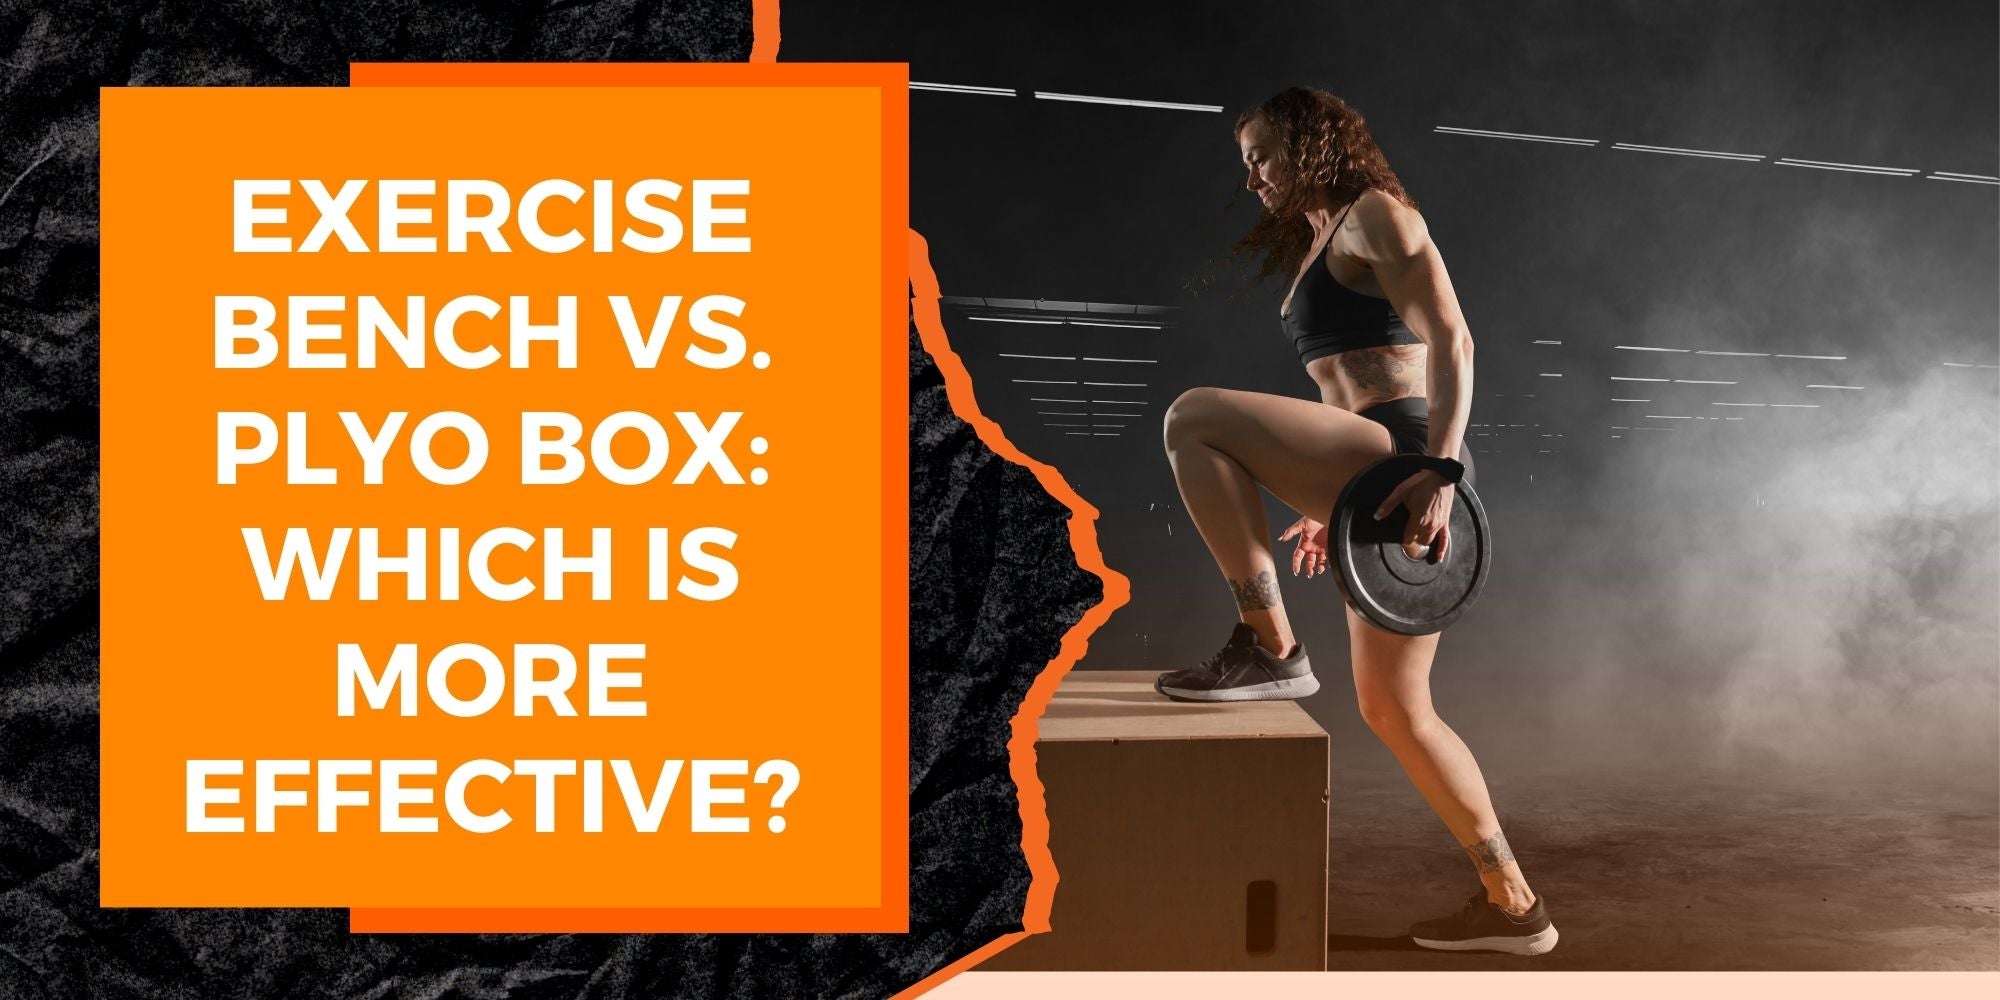 Exercise Bench vs. Plyo Box: Which is More Effective?